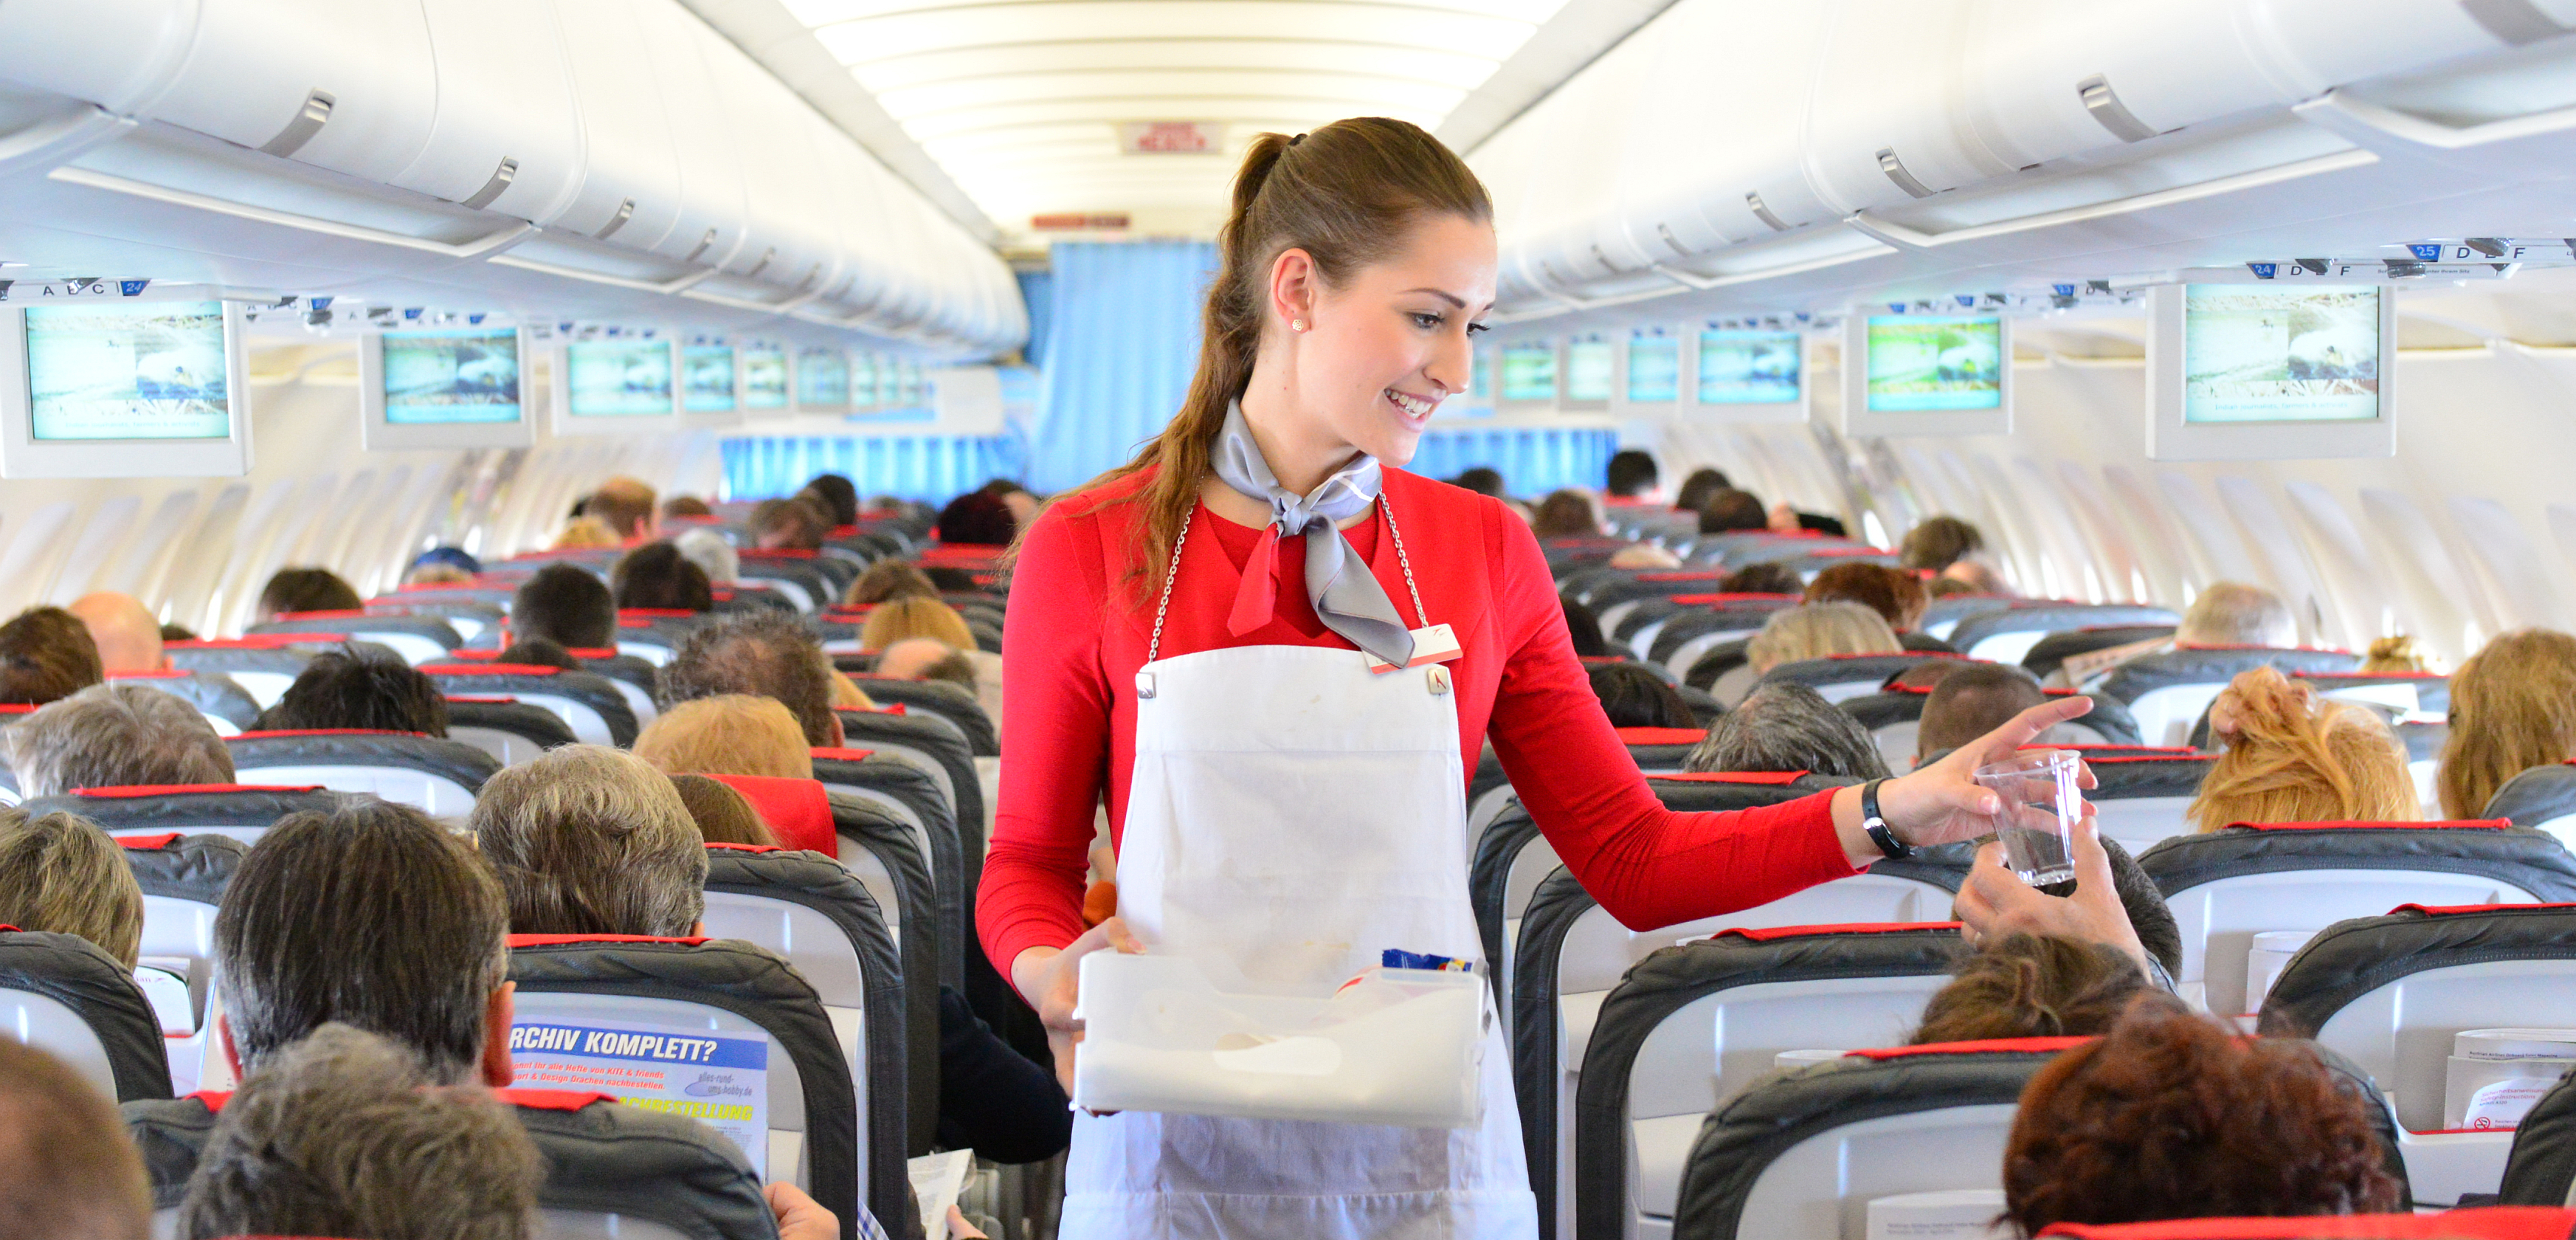 Things to do After Graduation: Becoming a Flight Attendant